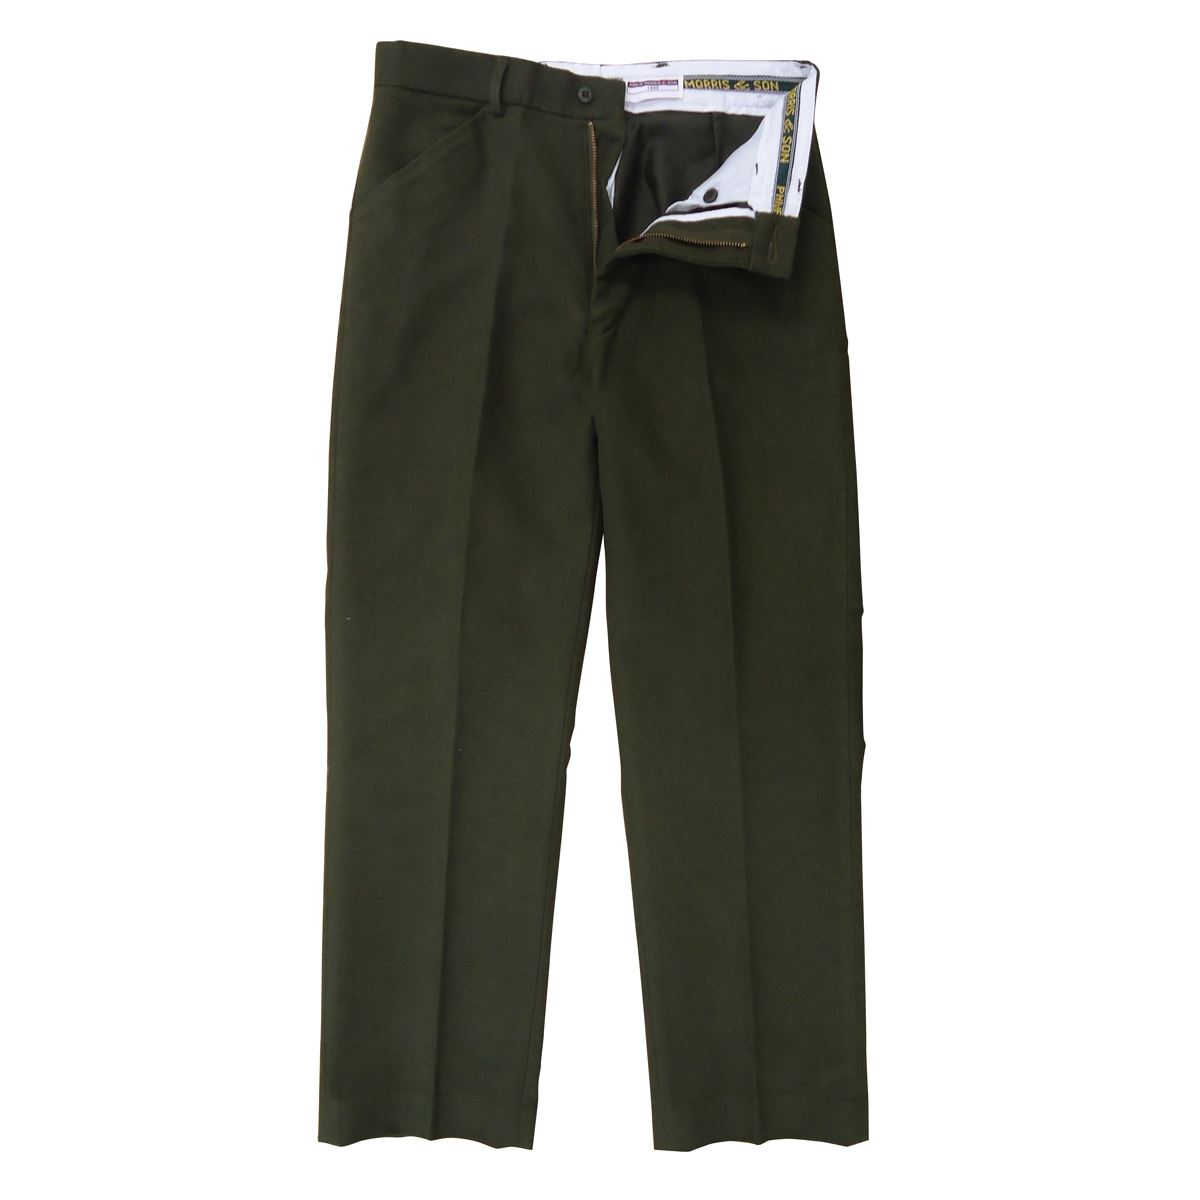 What are the Philip Morris & Son Heritage 1845 branded mens moleskin trousers?